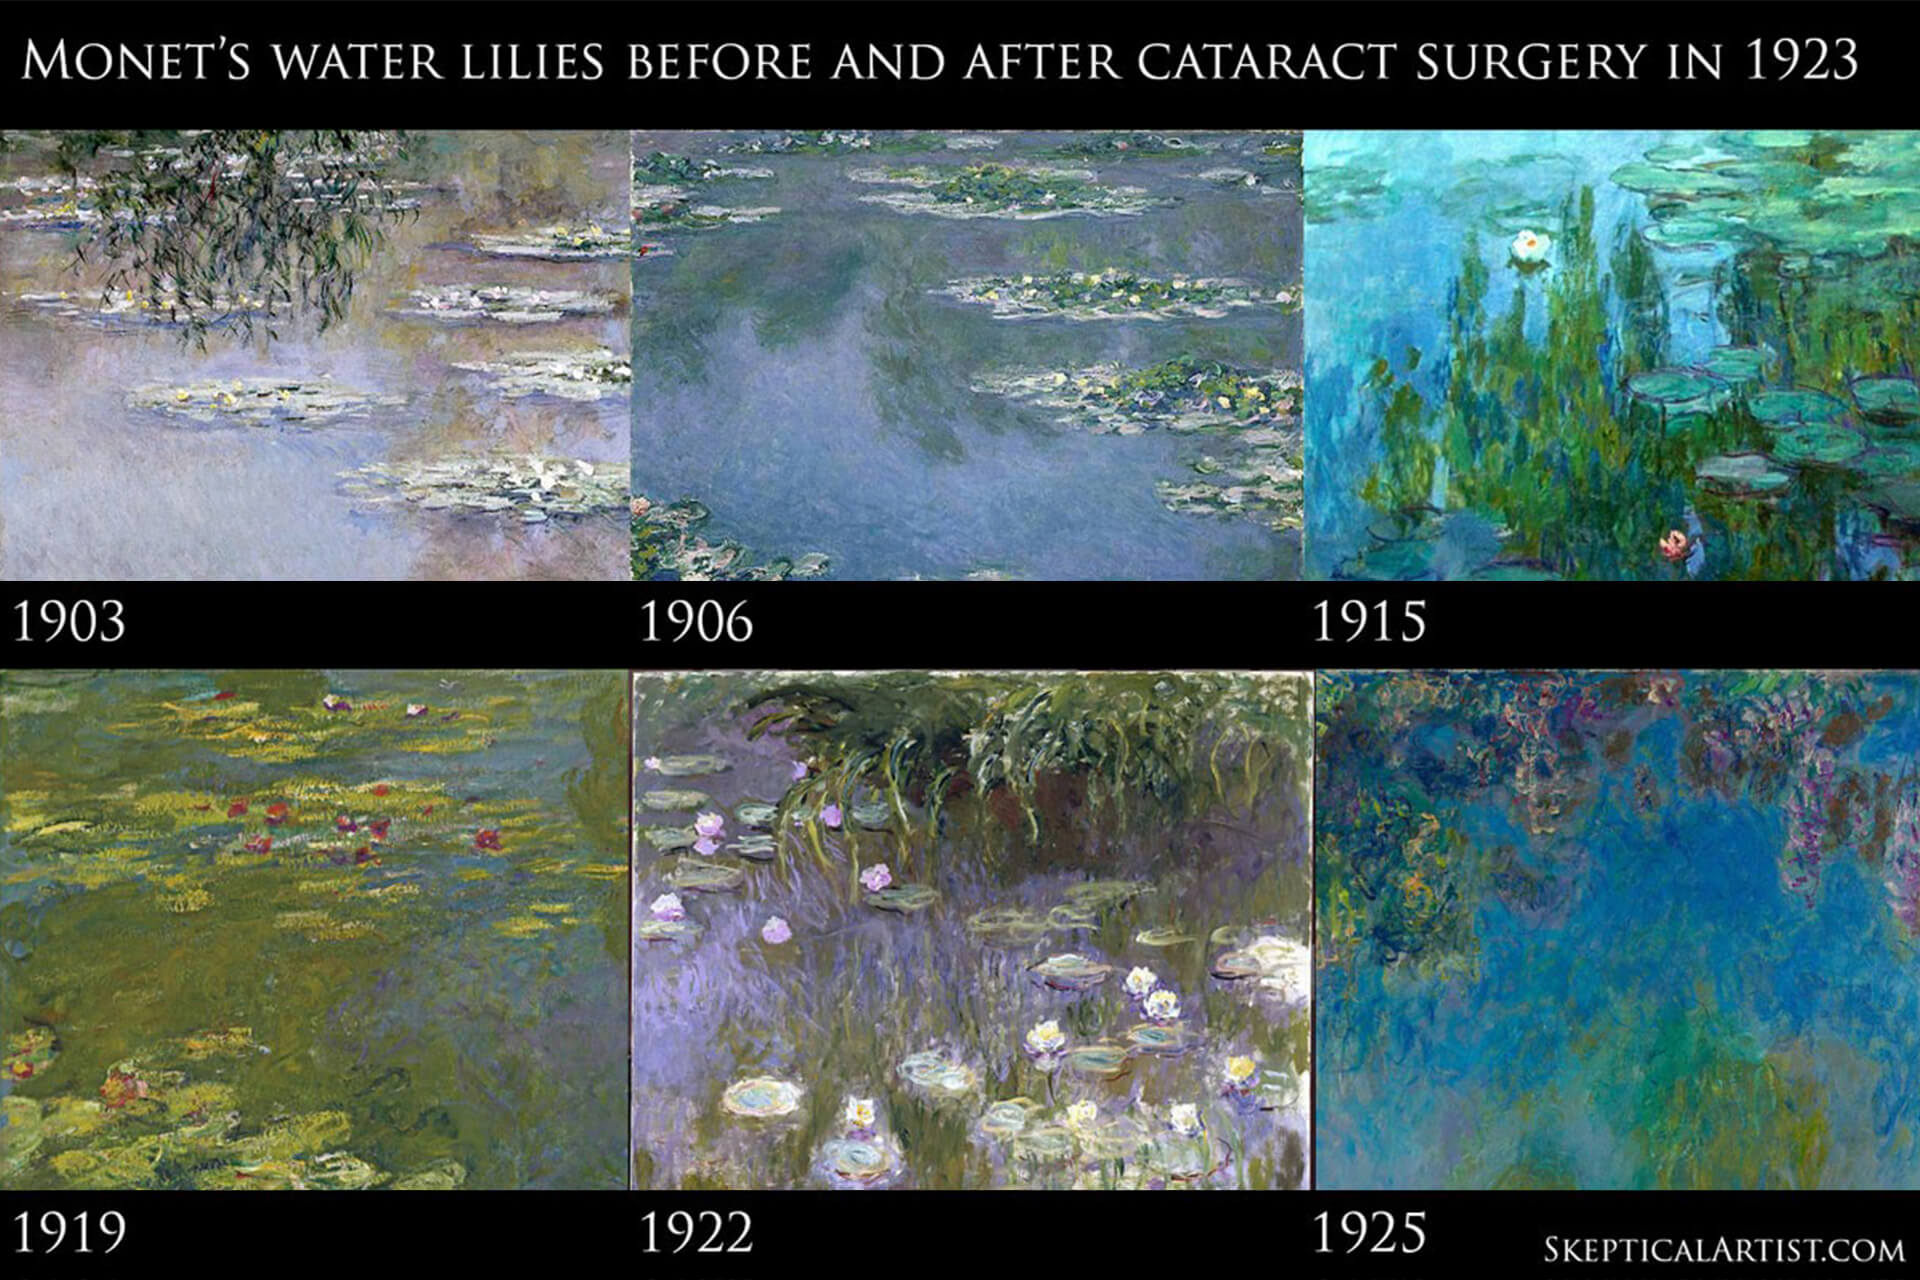 The absence of detail in Monet’s paintings during his period with cataracts is evident in these images.